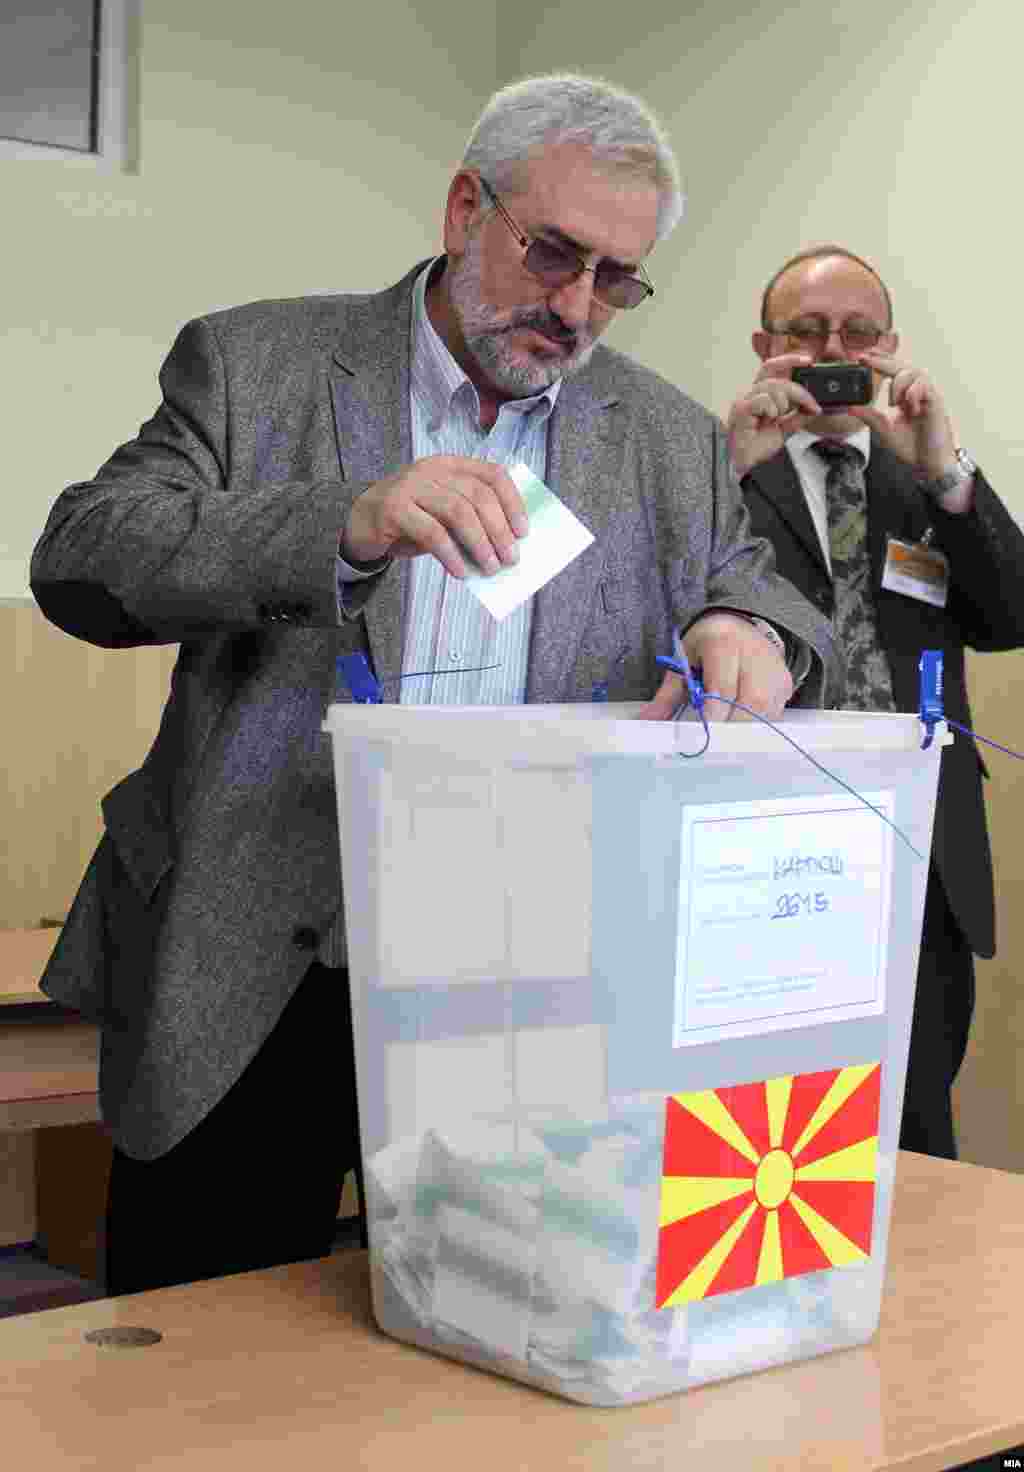 Macedonia - Zoran Popovski, candidate for President of Macedonia votes on first round of presidential elections in SKopje - 13Apr2014